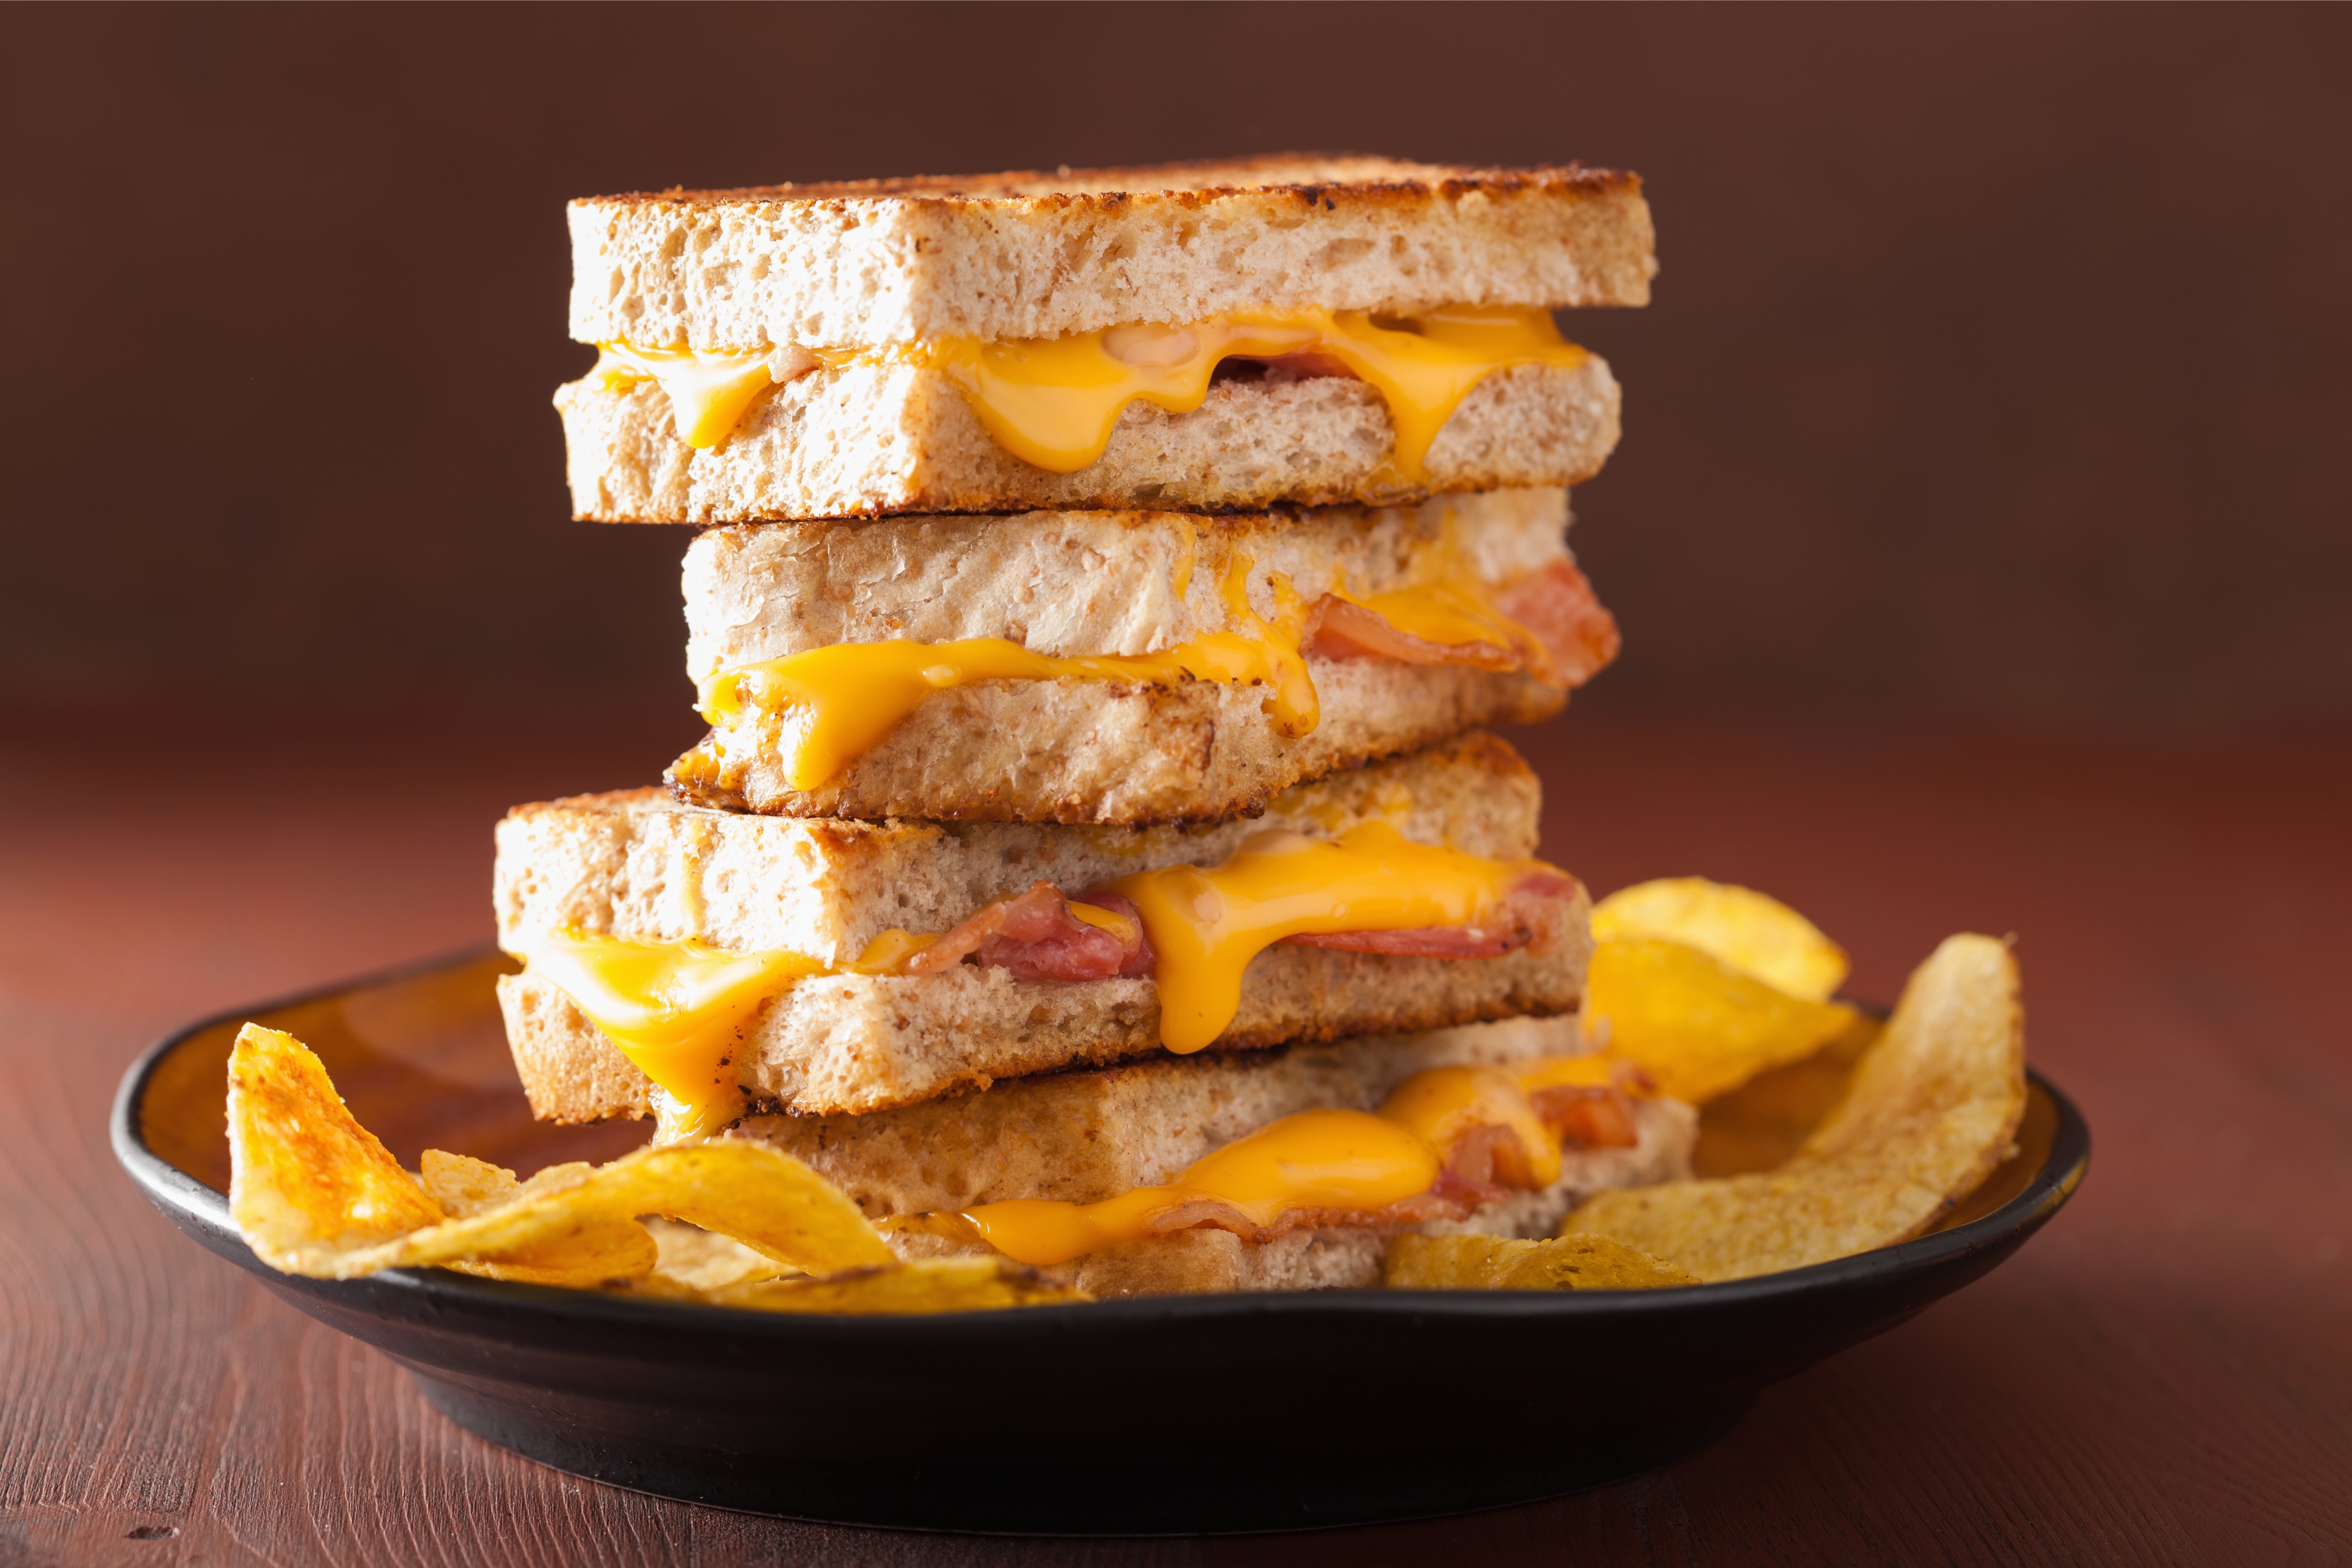 Close-up of a plate containing a stack of three grilled cheese sandwiches